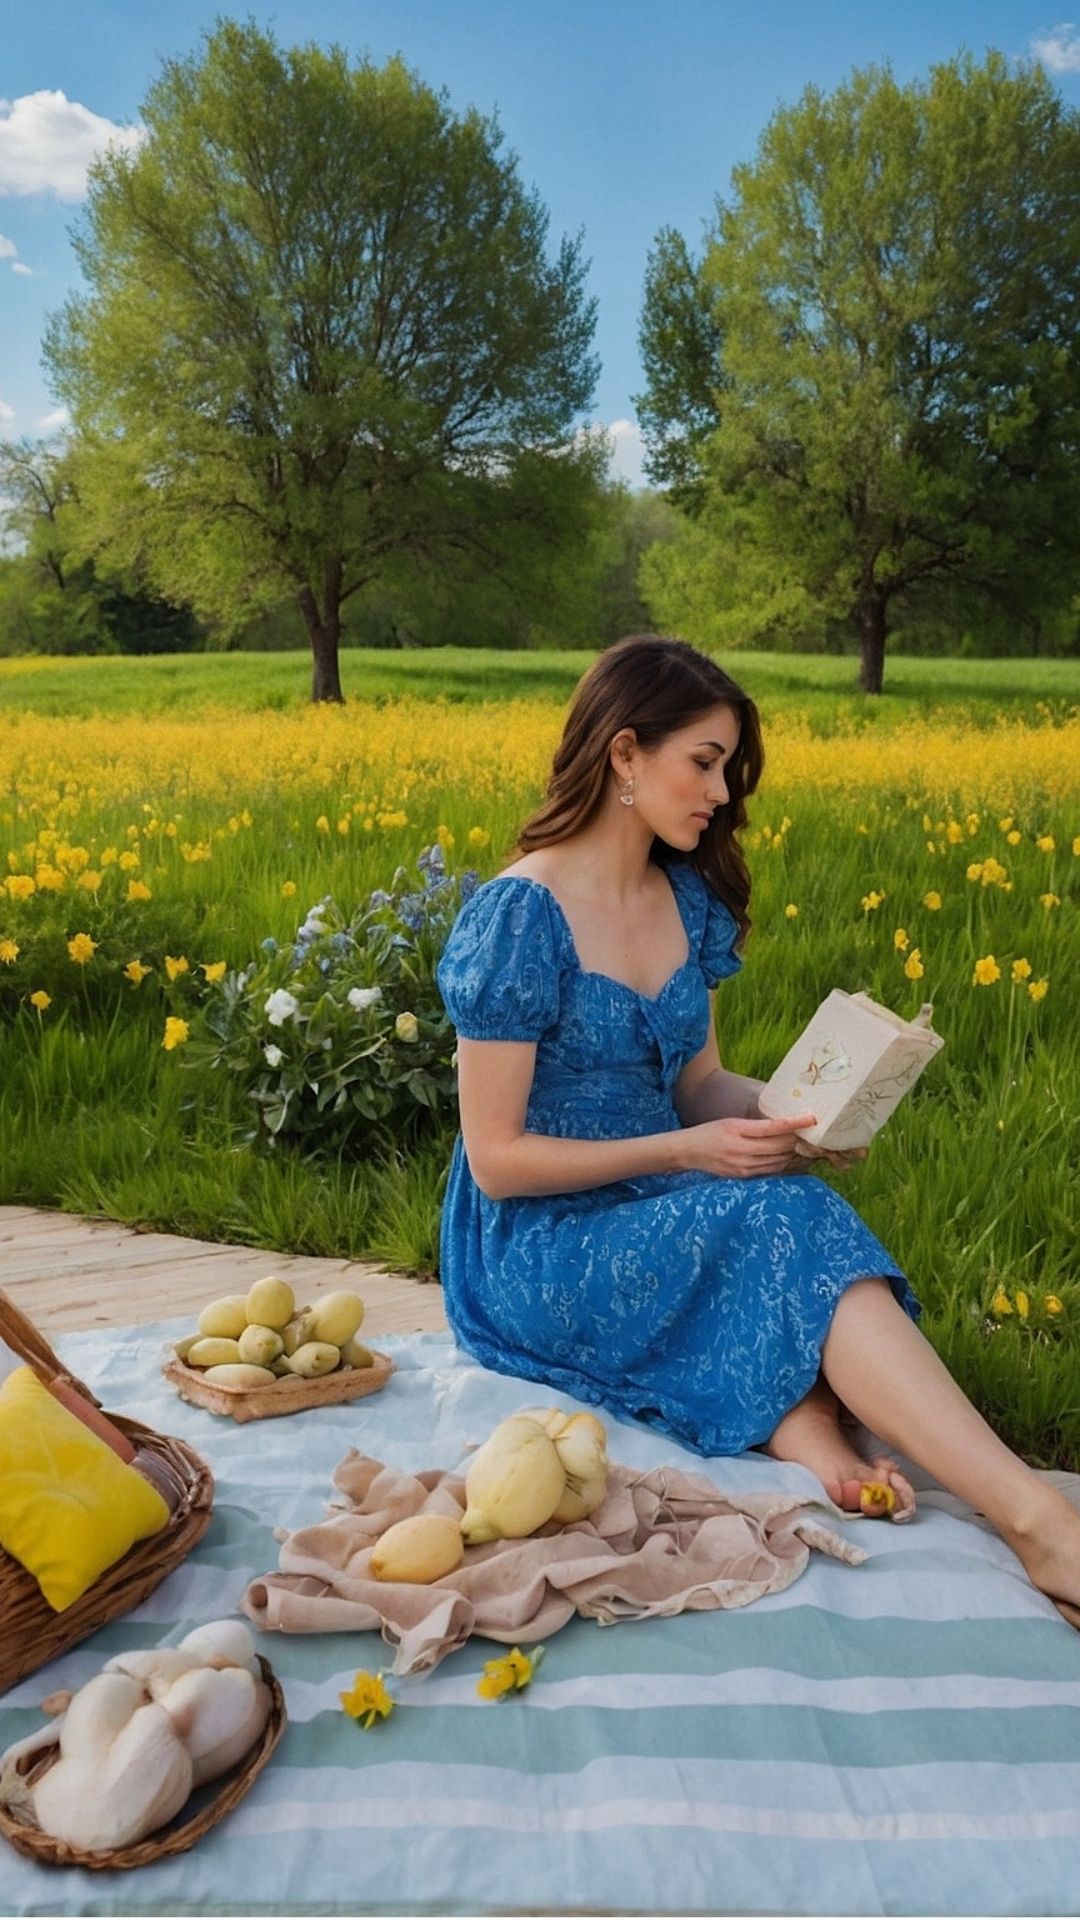 Meadow Muse: Blue Dress and Vintage Reading in the Field